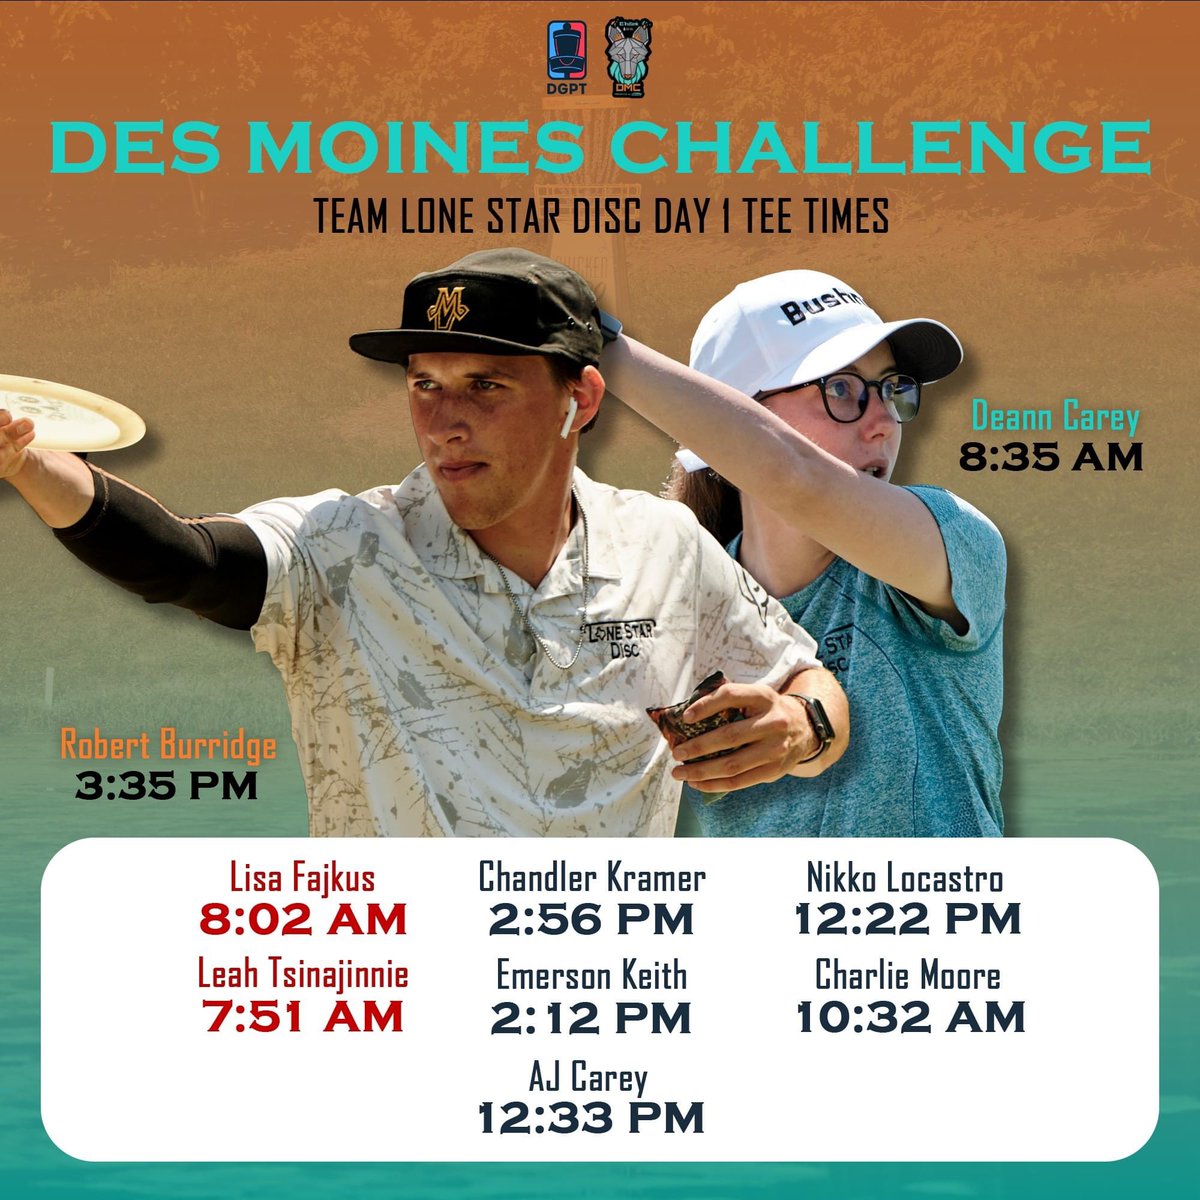 It's time for The 2023 TruBank Des Moines Challenge presented by Discraft. Here are your Tee Times for Team Lone Star Disc!

 #DGPT #PDGA #discgolflifestyle #TeamLoneStarDisc #discgolfeveryday #discgolfdaily #discgolfislife #discgolfing #LoneStarDisc #discgolfnation #discgolf